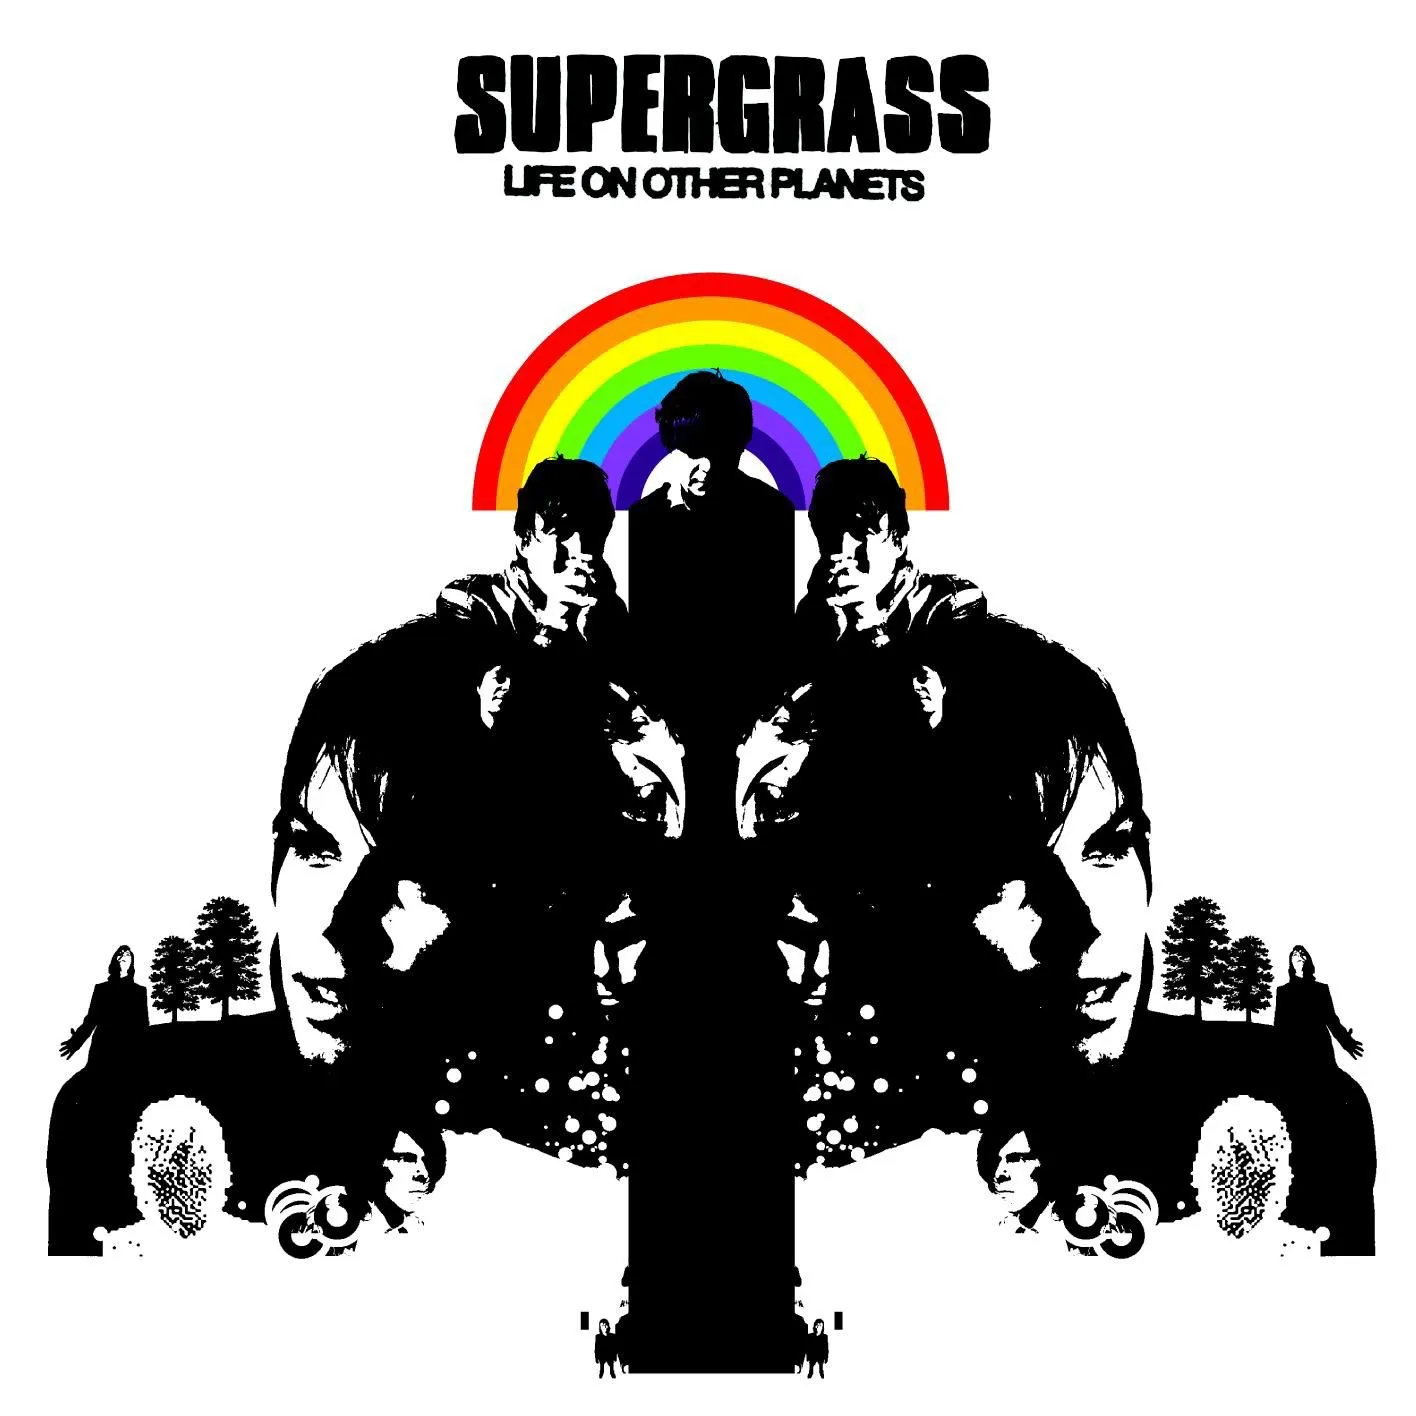 <strong>Supergrass - Life On Other Planets</strong> (Vinyl LP - white)